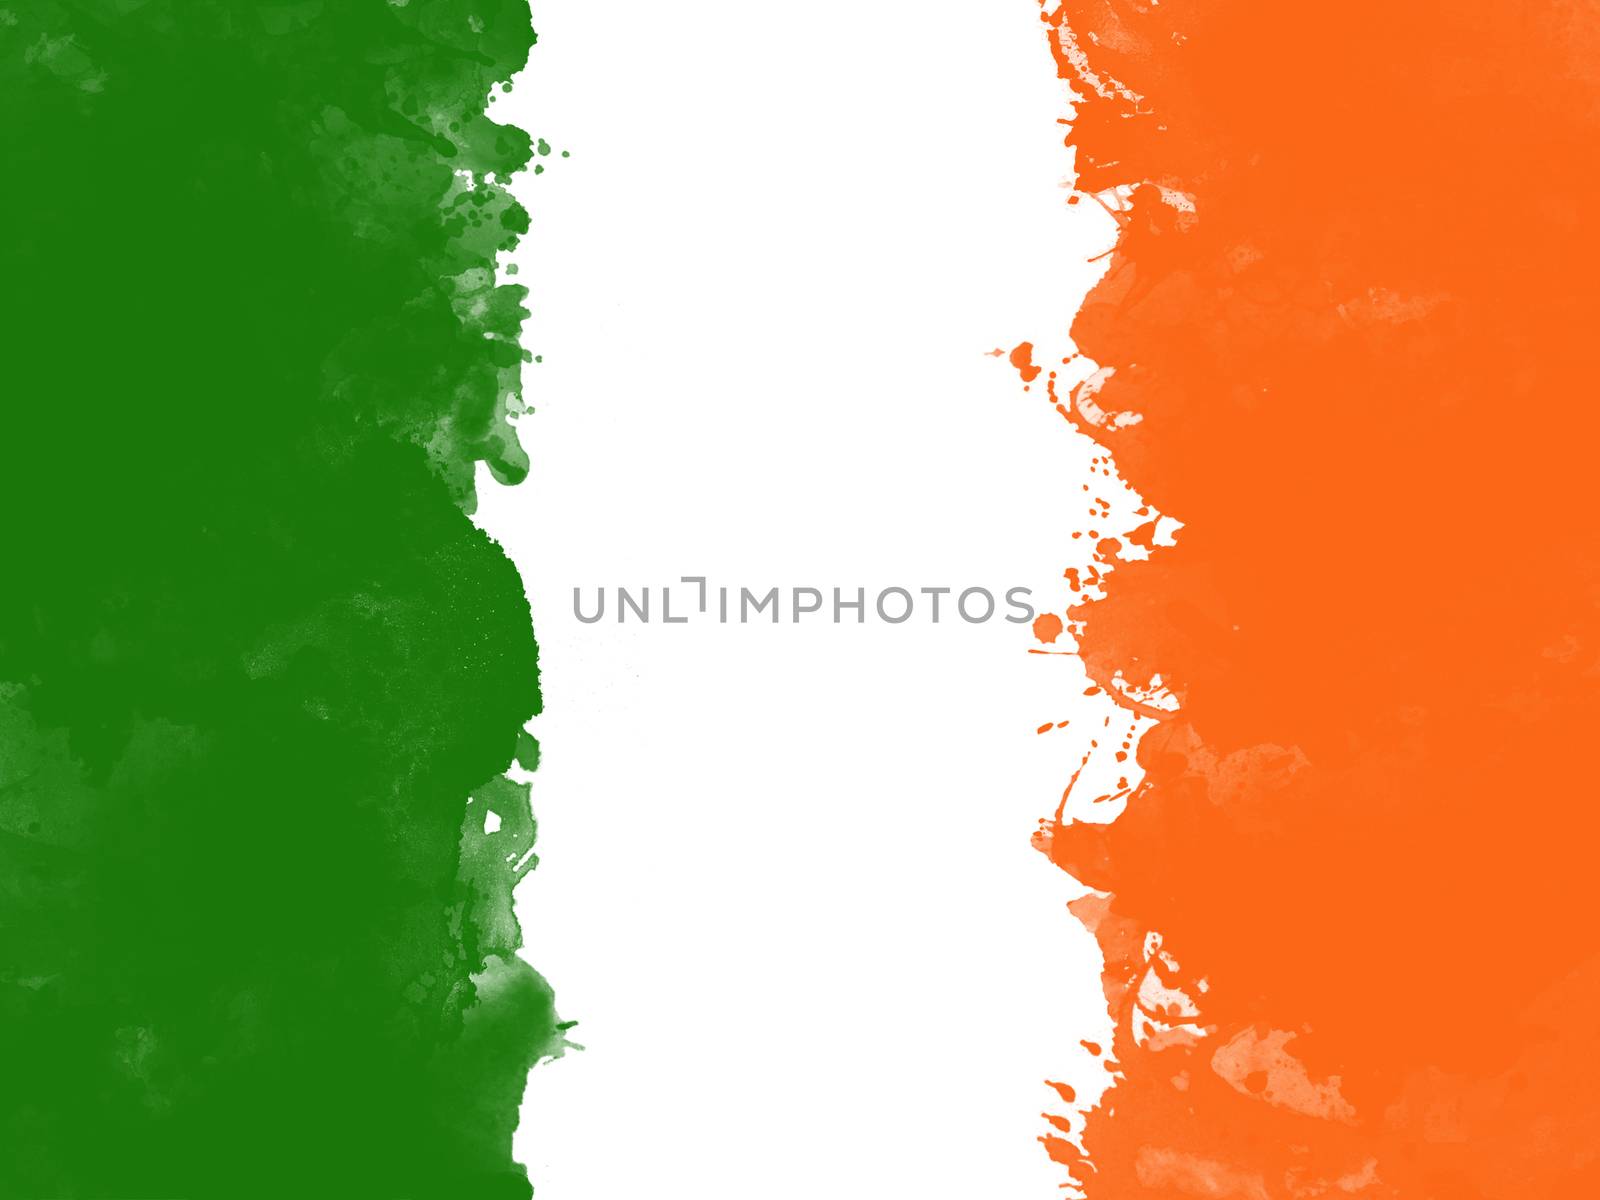 Flag of Ireland by watercolor paint brush, grunge style